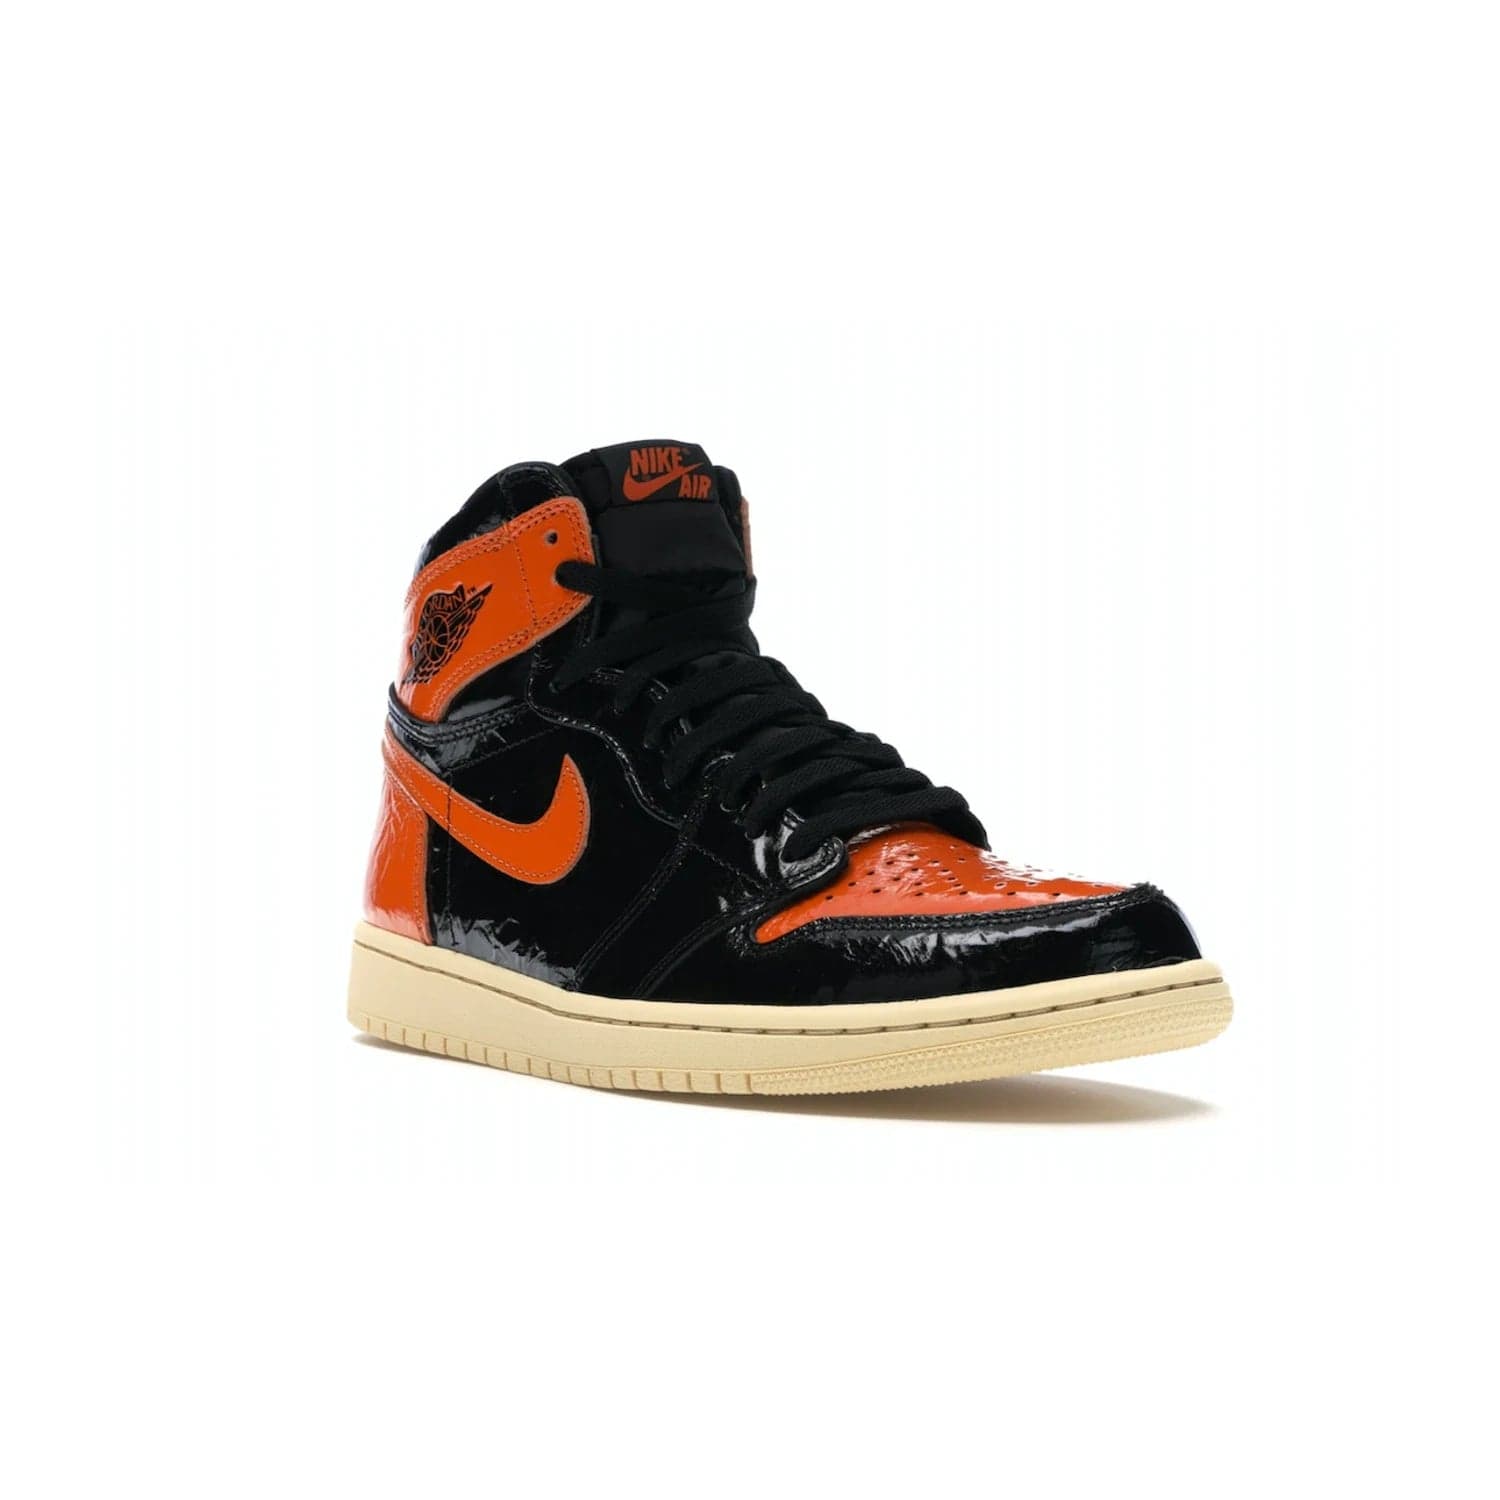 Jordan 1 Retro High Shattered Backboard 3.0 - Image 6 - Only at www.BallersClubKickz.com - #
Jordan 1 Retro High Shattered Backboard 3.0: the perfect blend of modern style and nostalgic flair featuring an orange and black crinkled patent leather upper and yellowed vanilla outsole. Get these exclusive sneakers released in October of 2019!